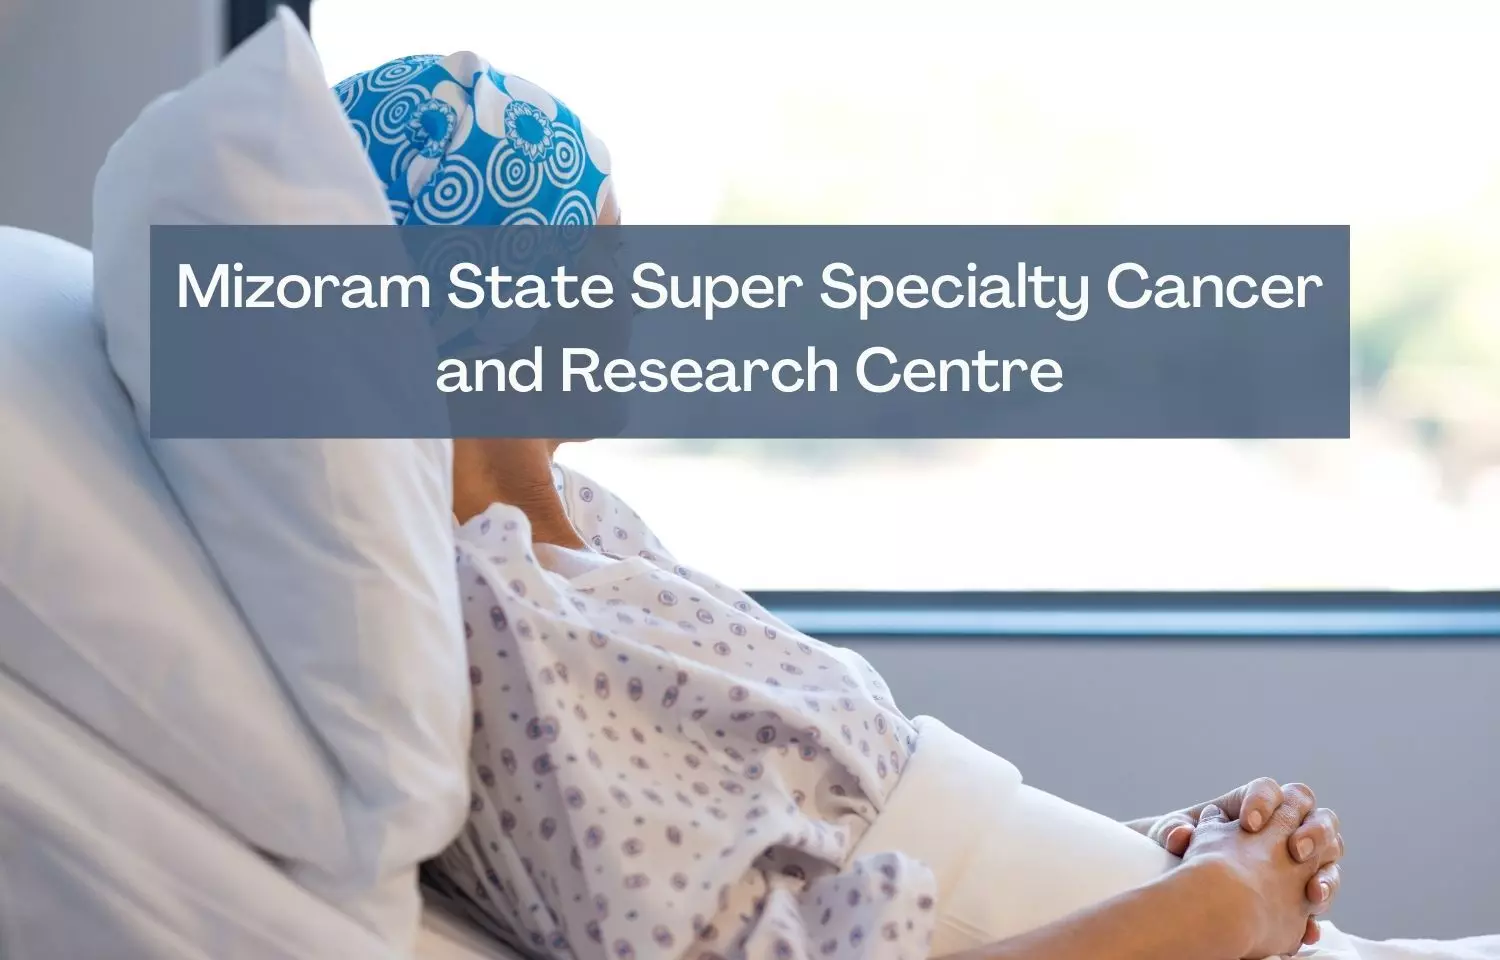 Mizoram super speciality cancer centre in Aizwal by 2028